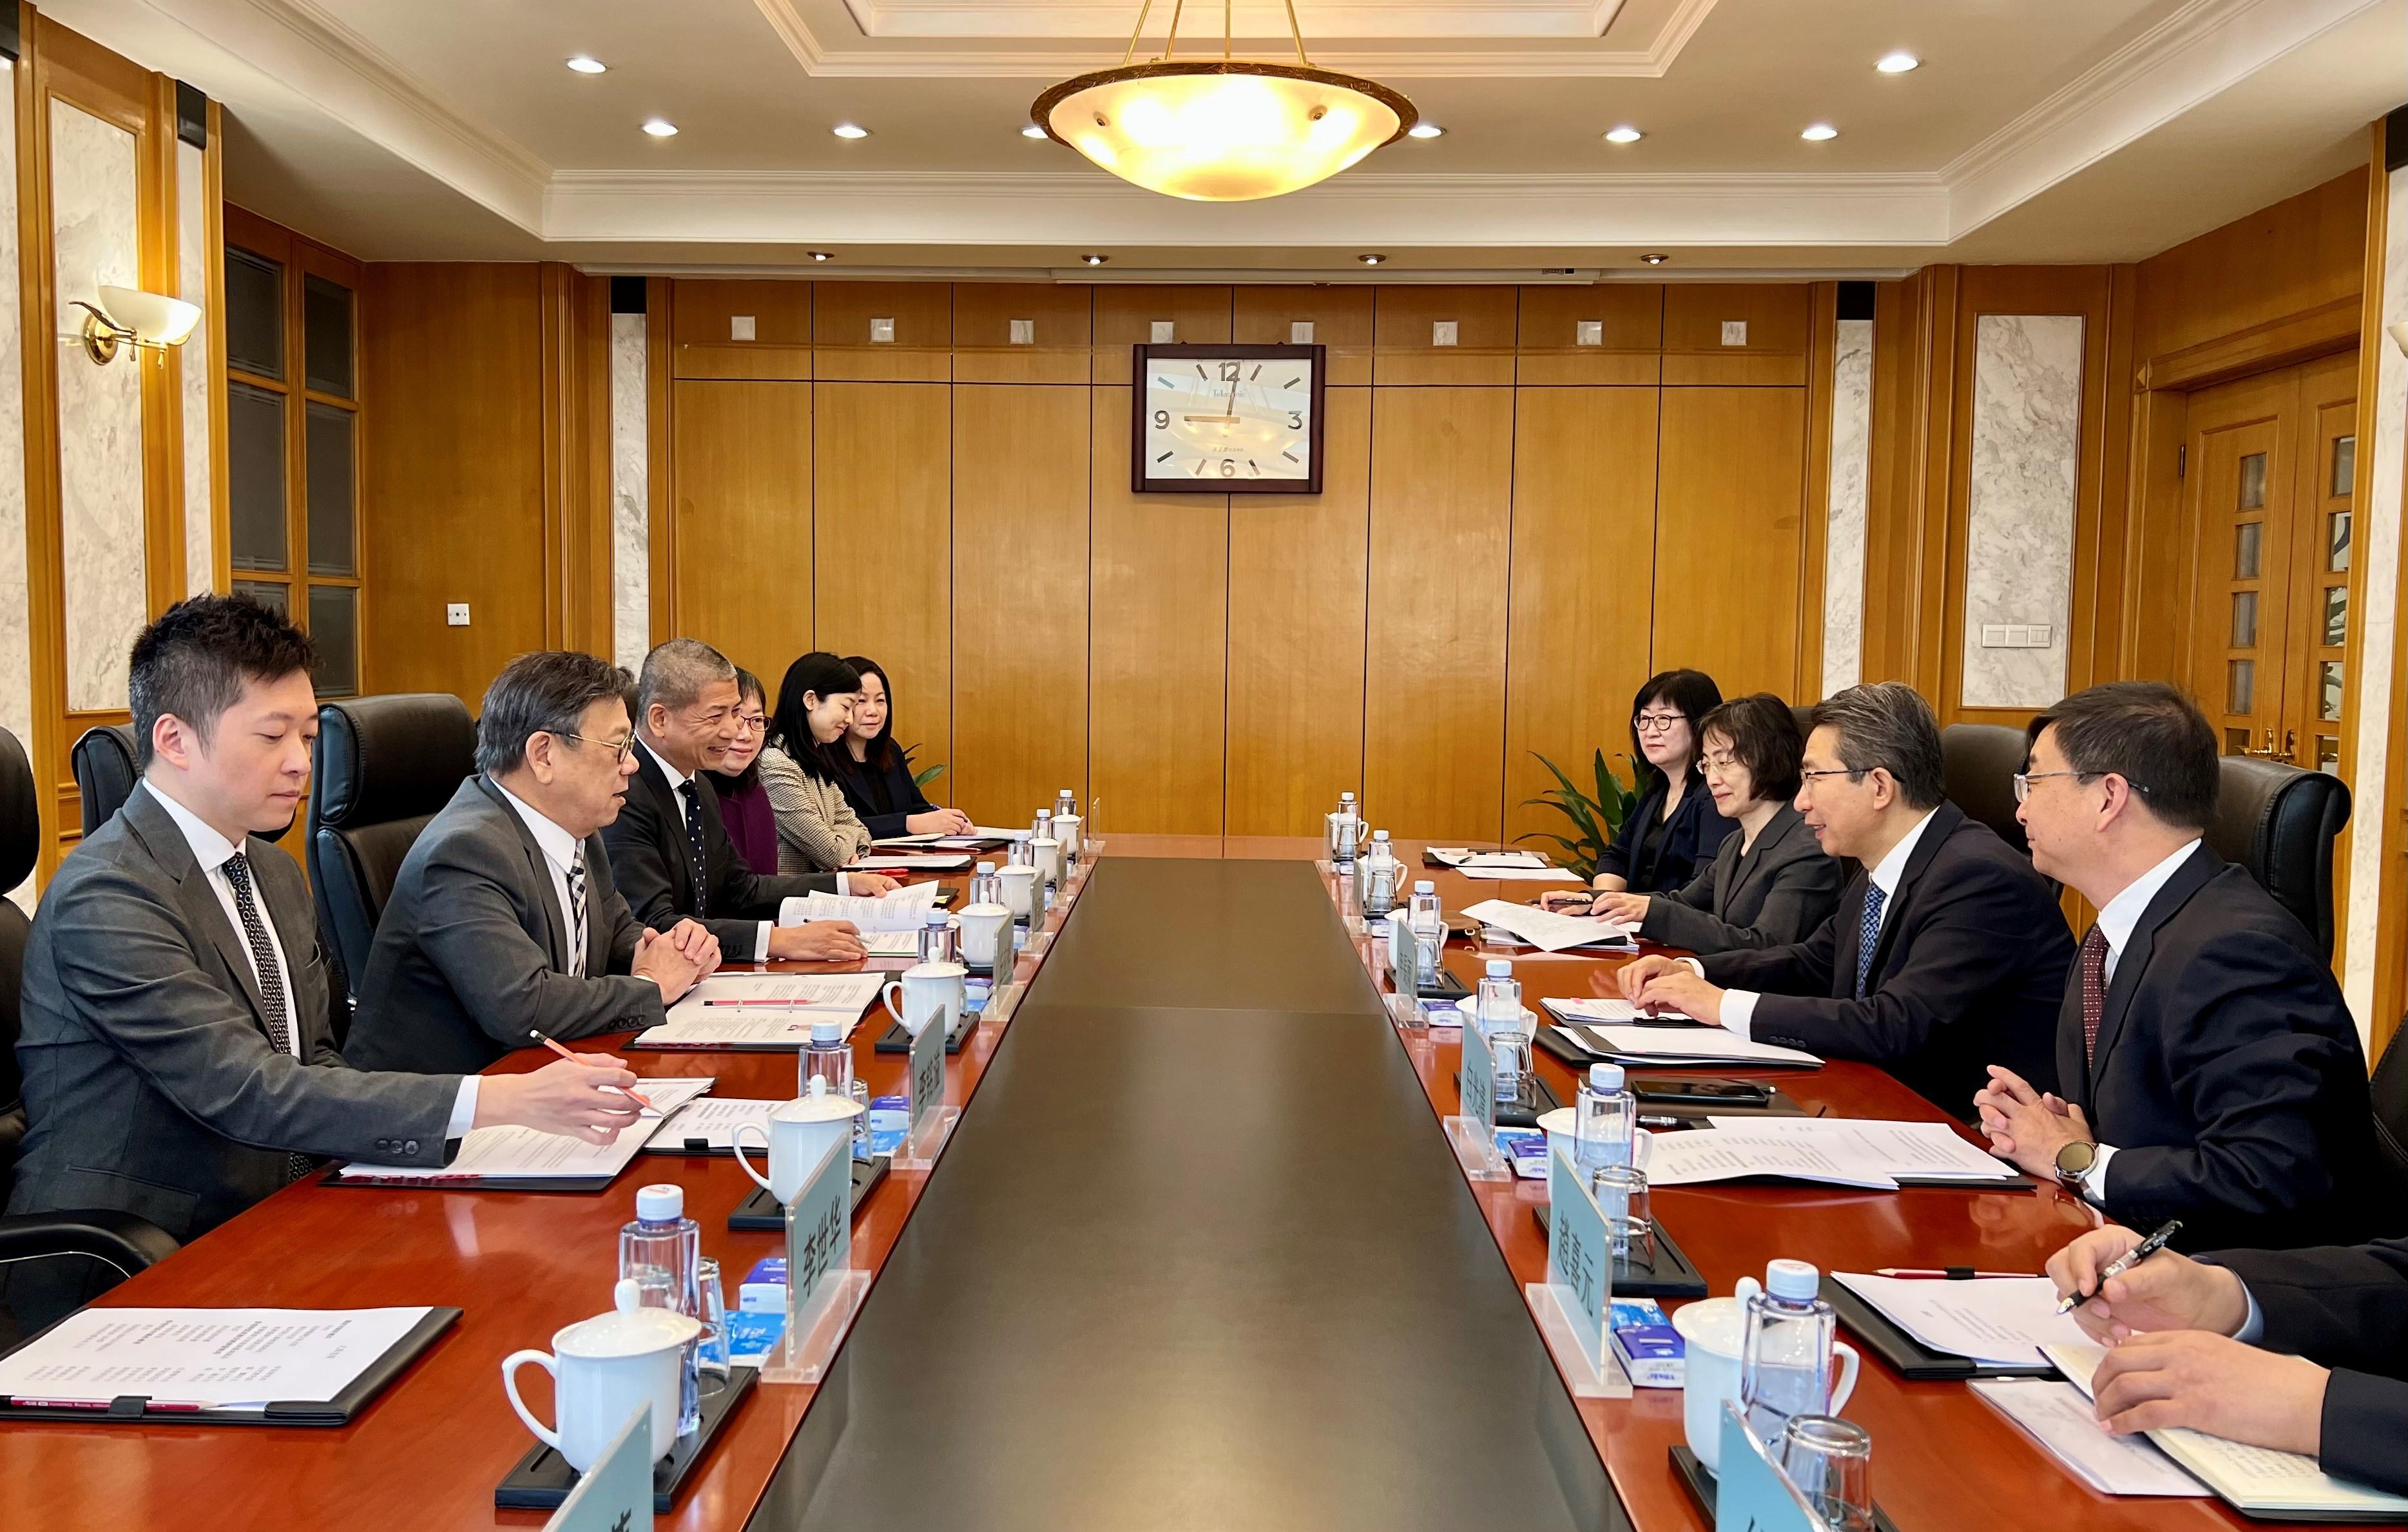 The Secretary for Commerce and Economic Development, Mr Algernon Yau (second left), met with the Commissioner of the China National Intellectual Property Administration, Dr Shen Changyu (second right), in Beijing today (April 19) to exchange views on relevant scopes of work. The Director of Intellectual Property, Mr David Wong (third left), also attended the meeting.